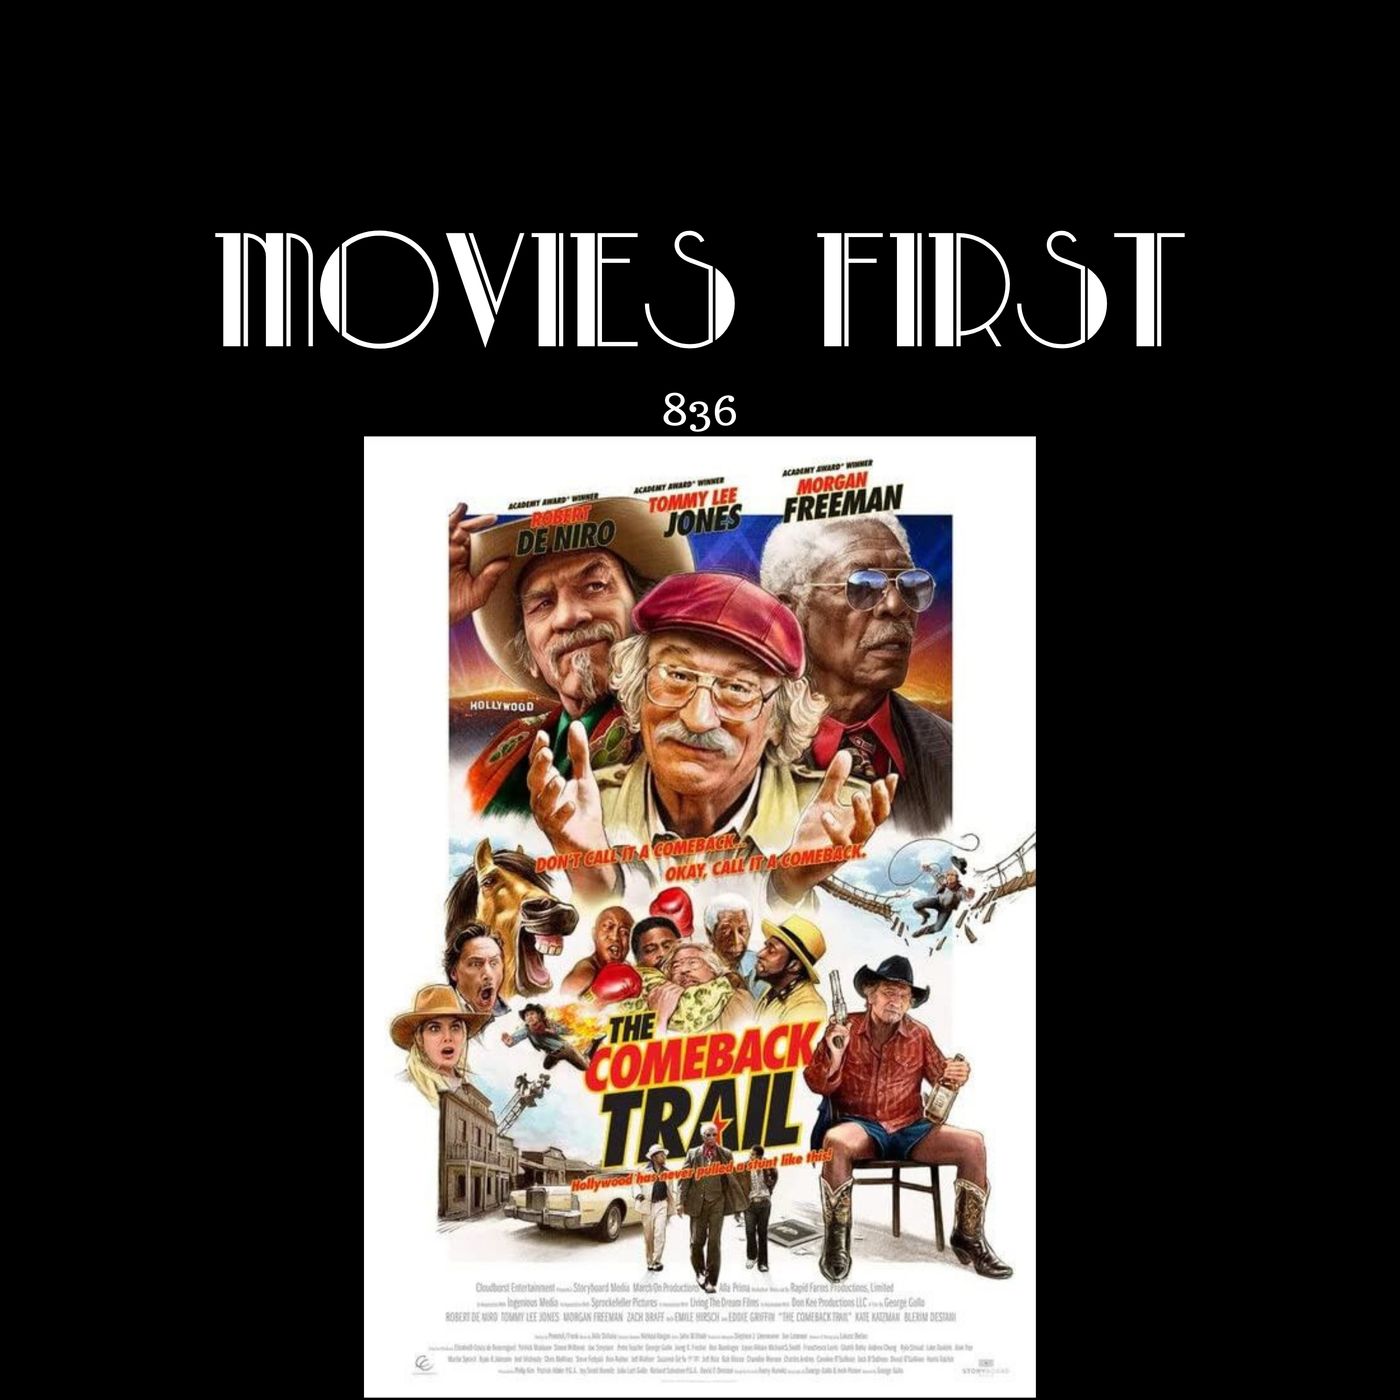 The Comeback Trail (Action, Comedy) (the @MoviesFirst review)